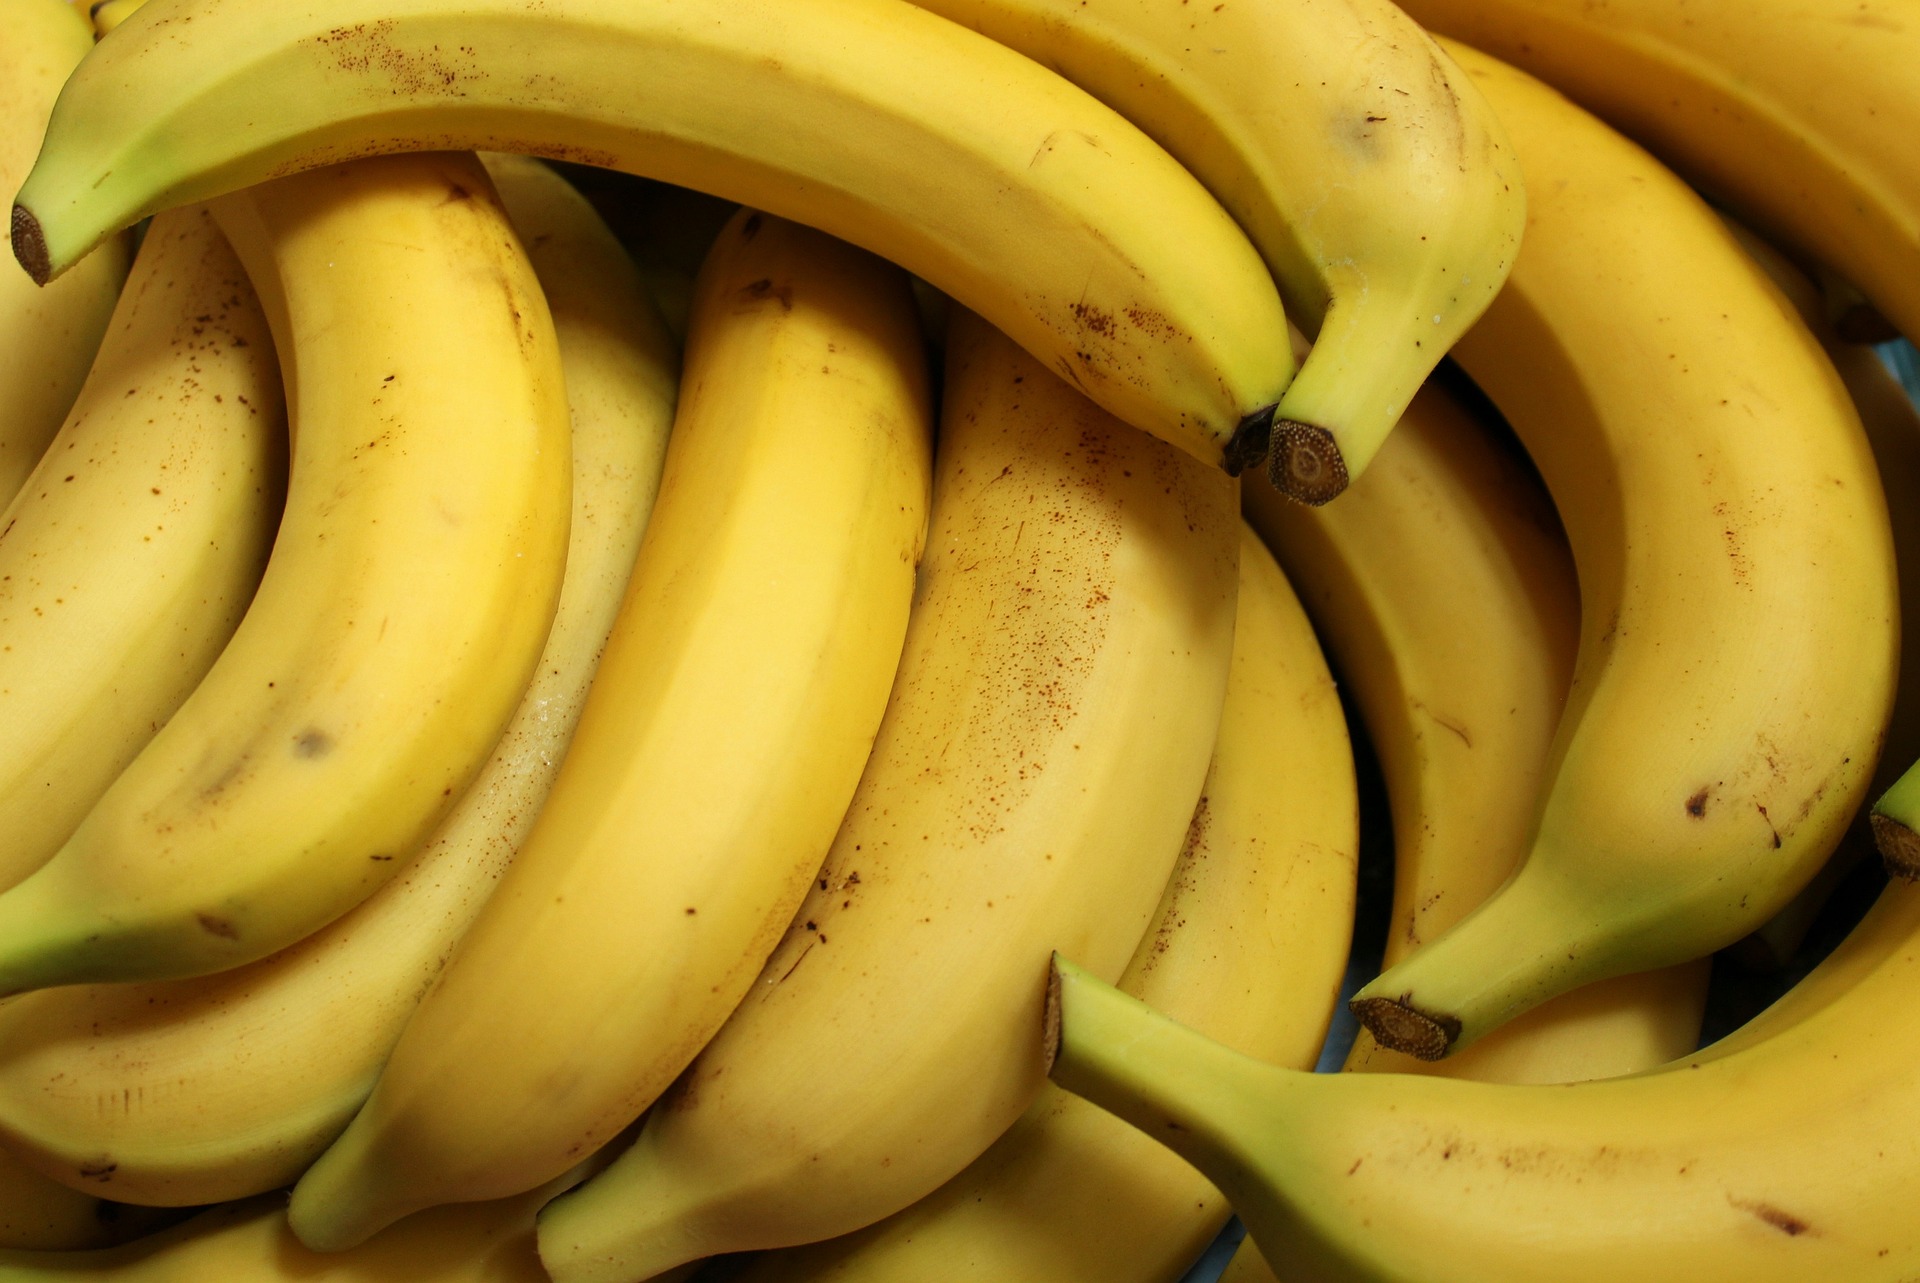 A pile of bananas; our banana allergy compensation solicitors can assist you with making a compensation claim.  Click this picture to read more about banana allergy compensation claims.